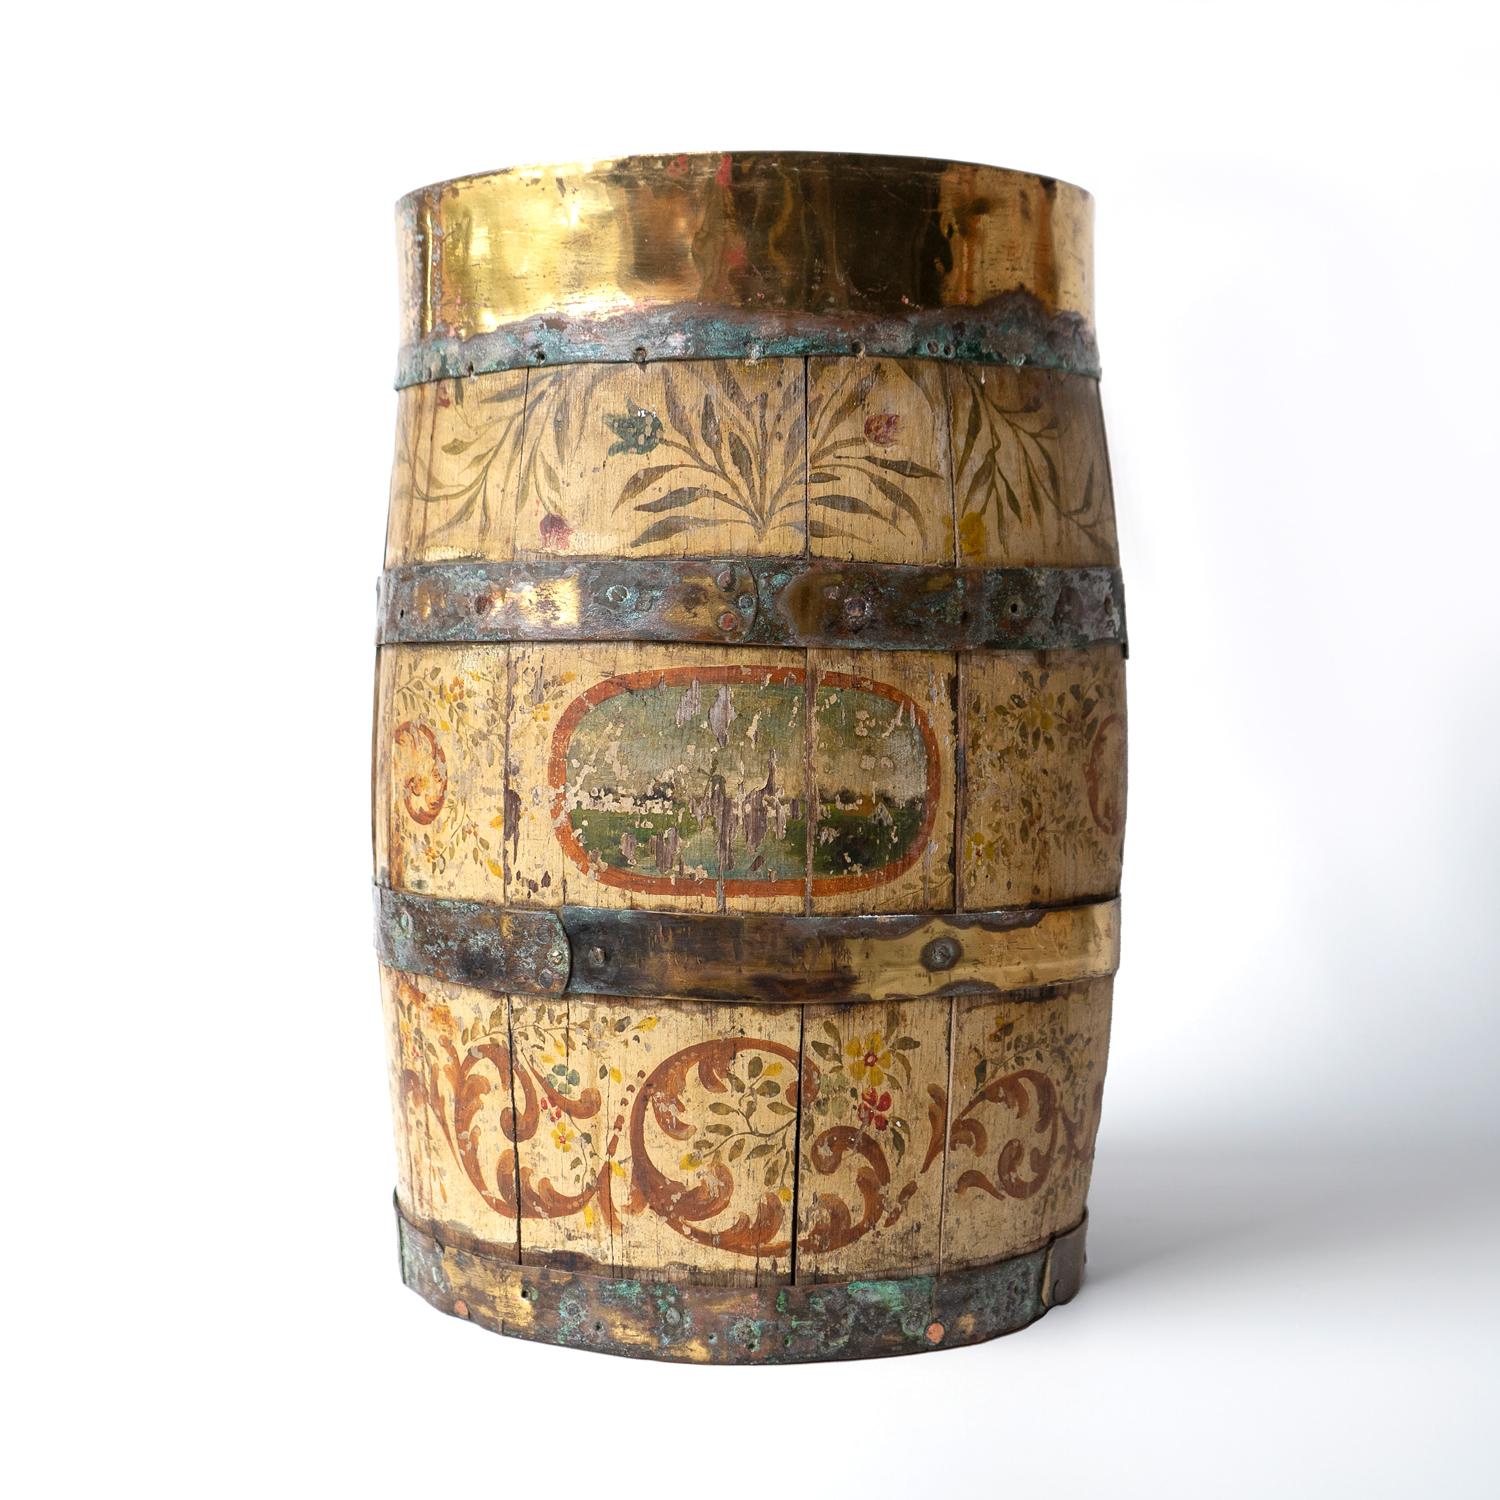 ANTIQUE SCANDINAVIAN HAND PAINTED CONTAINER 
An oak coopered barrel stick stand with brass banding which has been lovingly painted with stylised floral and foliate decoration throughout, each side there is a landscape depicted, one side with a young